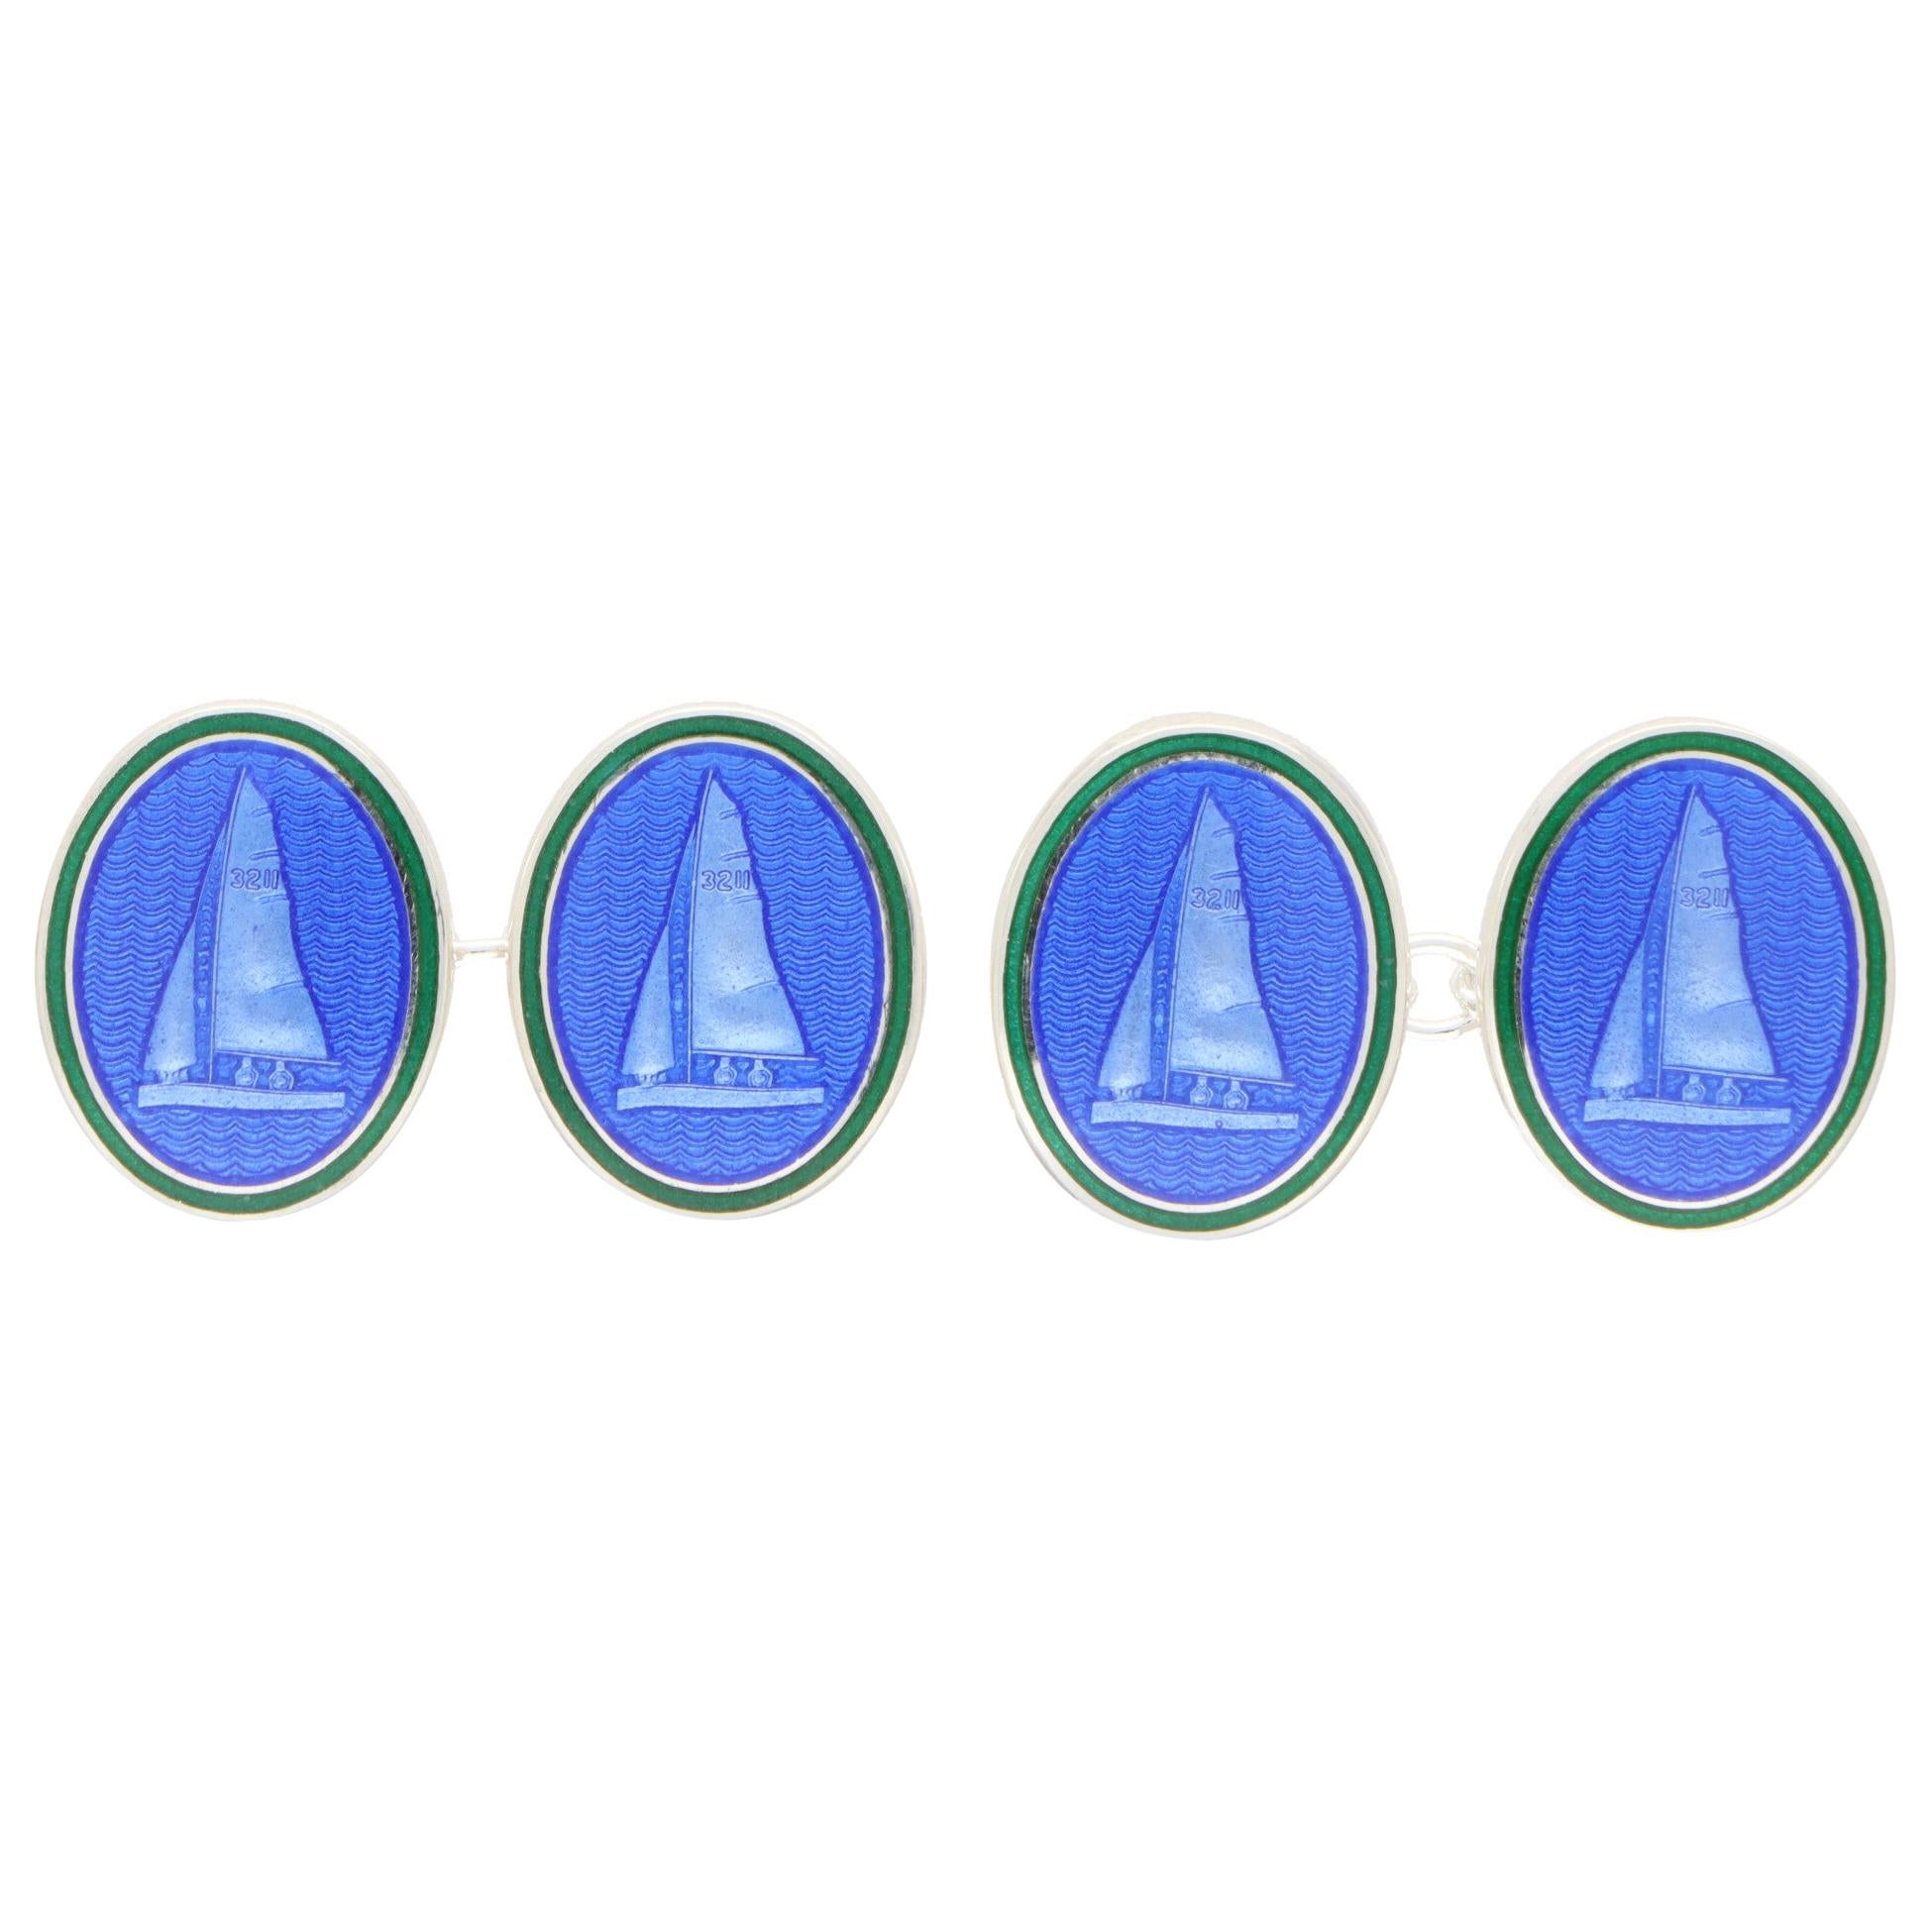 Blue and Green Enamel Yacht Sailing Cufflinks in British Sterling Silver